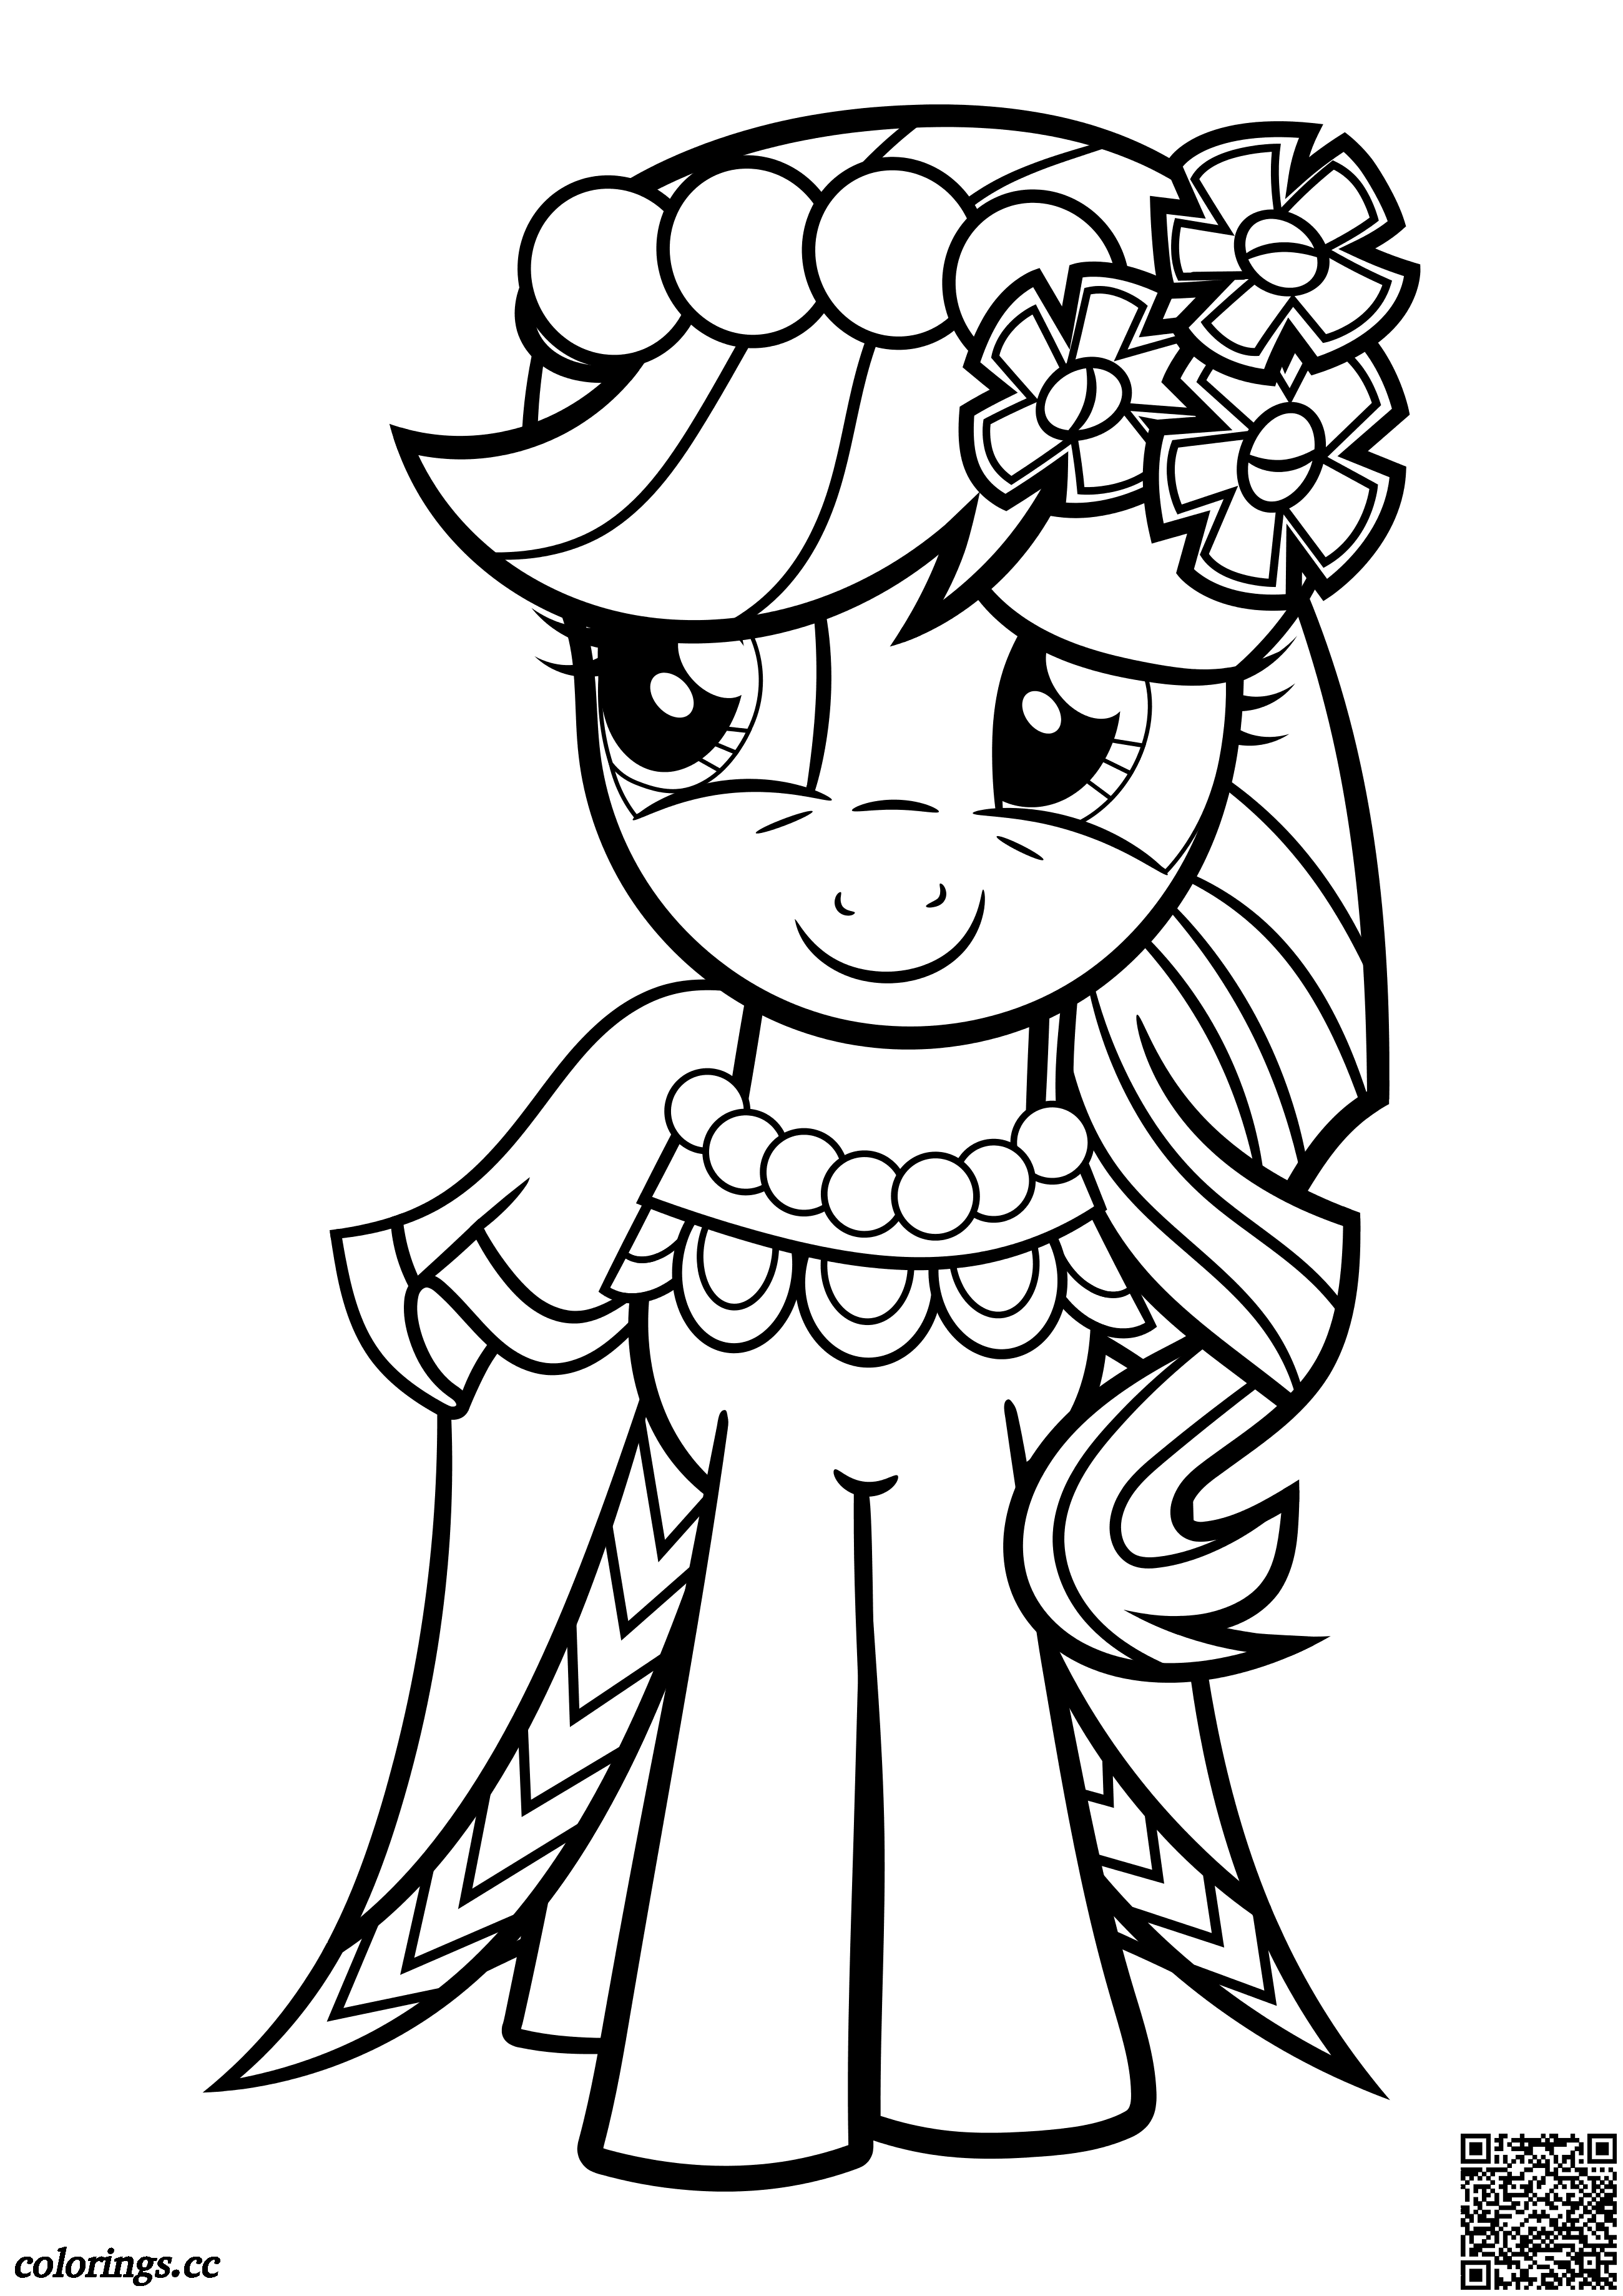 my little pony friendship is magic coloring pages applejack